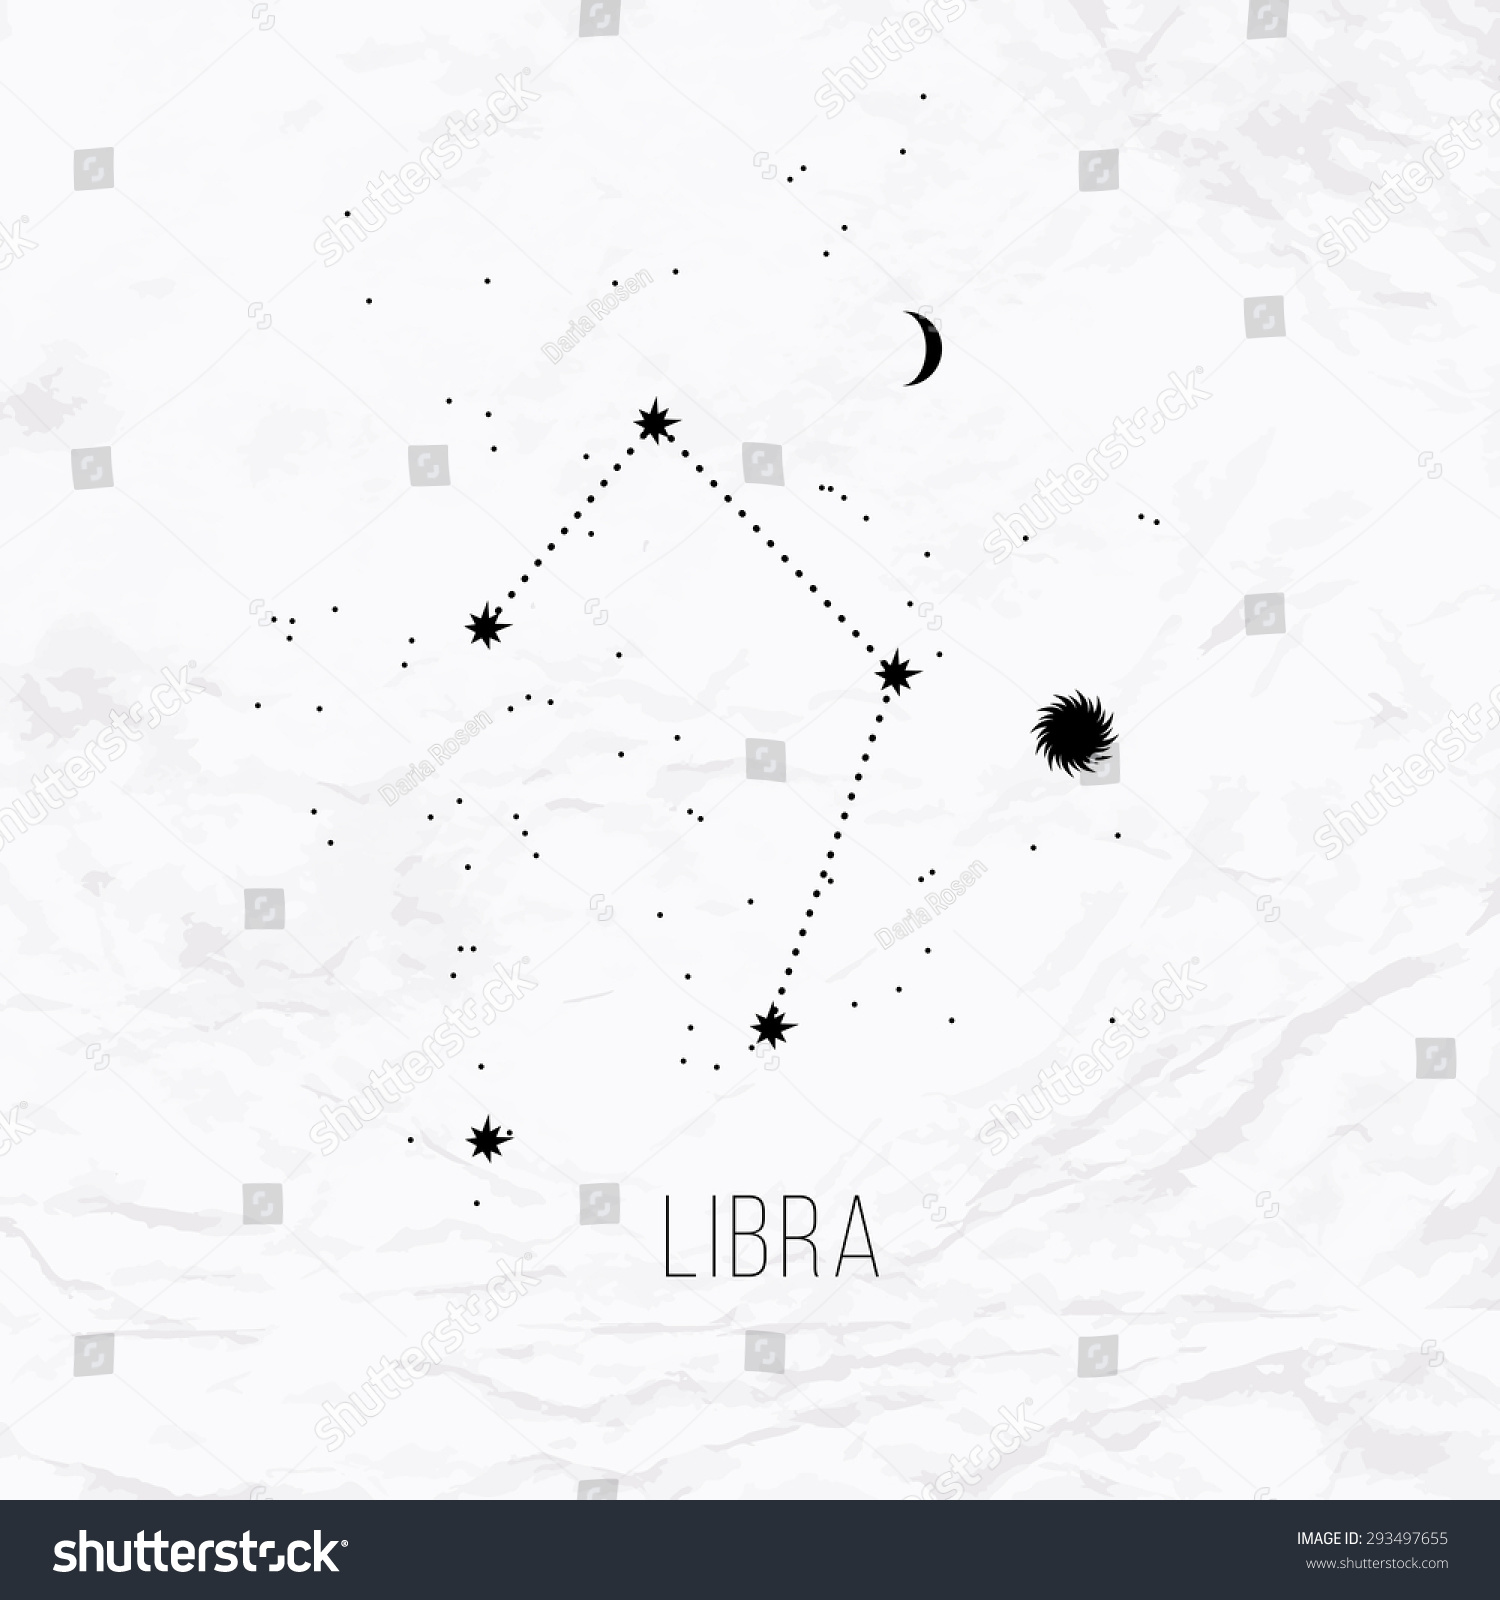 Astrology Sign Libra On White Paper Background. Zodiac Constellation ...